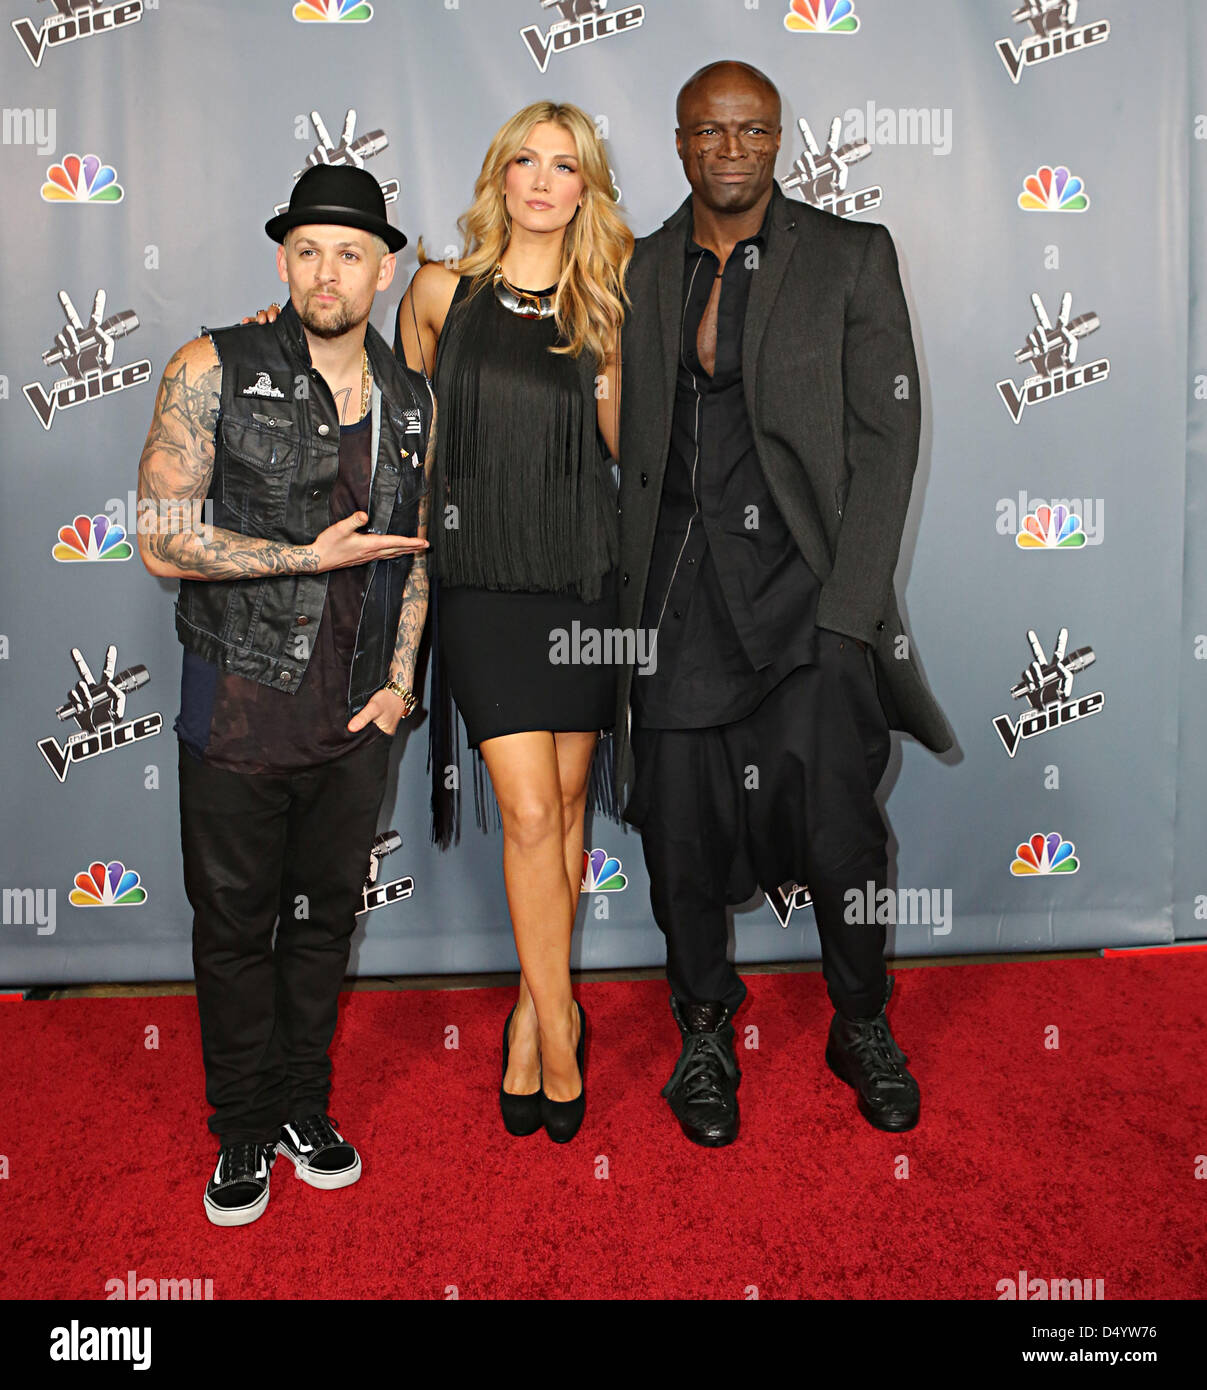 Los Angeles, California, USA. March 20, 2013. JOEL MADDEN DELTA GOODREM AND SEAL attend The Voice Season Four Premiere Credit Image: Credit:  Karen Curley/ZUMAPRESS.com/Alamy Live News Stock Photo